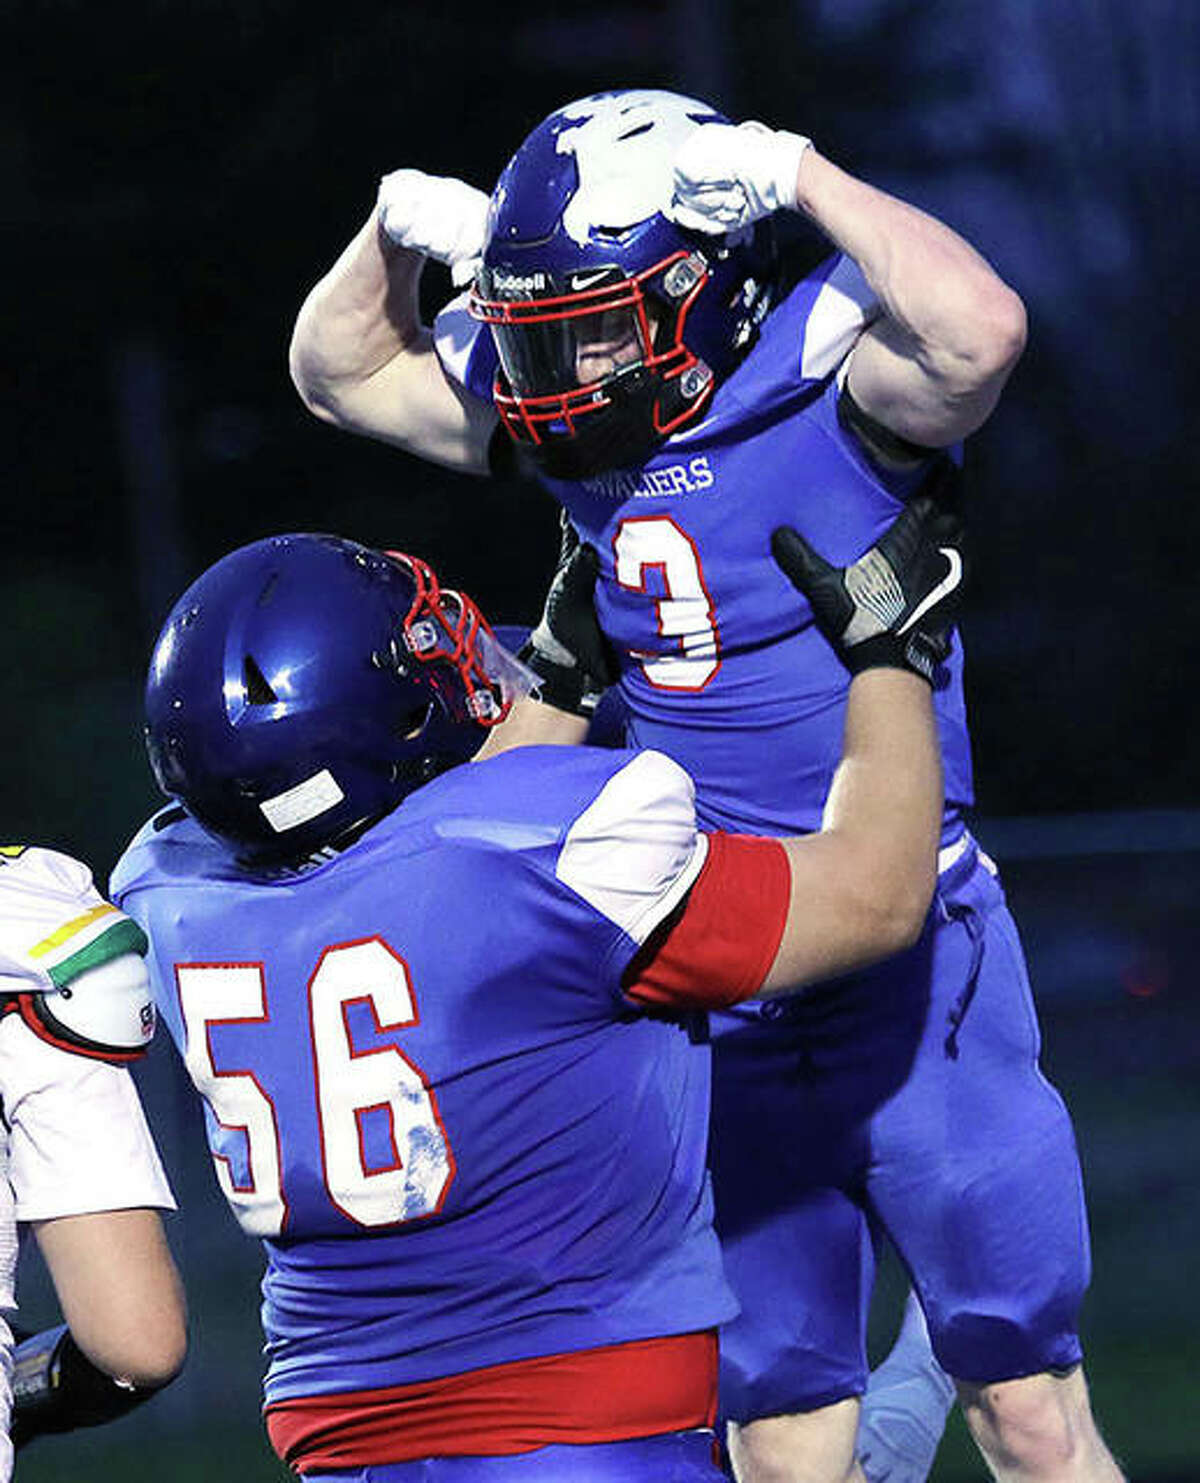 Carlinville’s Bobby Seal (3) is congratulated by teammate Ethan Trimm (56) after Seal scored one of his four TDs in a win over Southwestern last season in Carlinville.